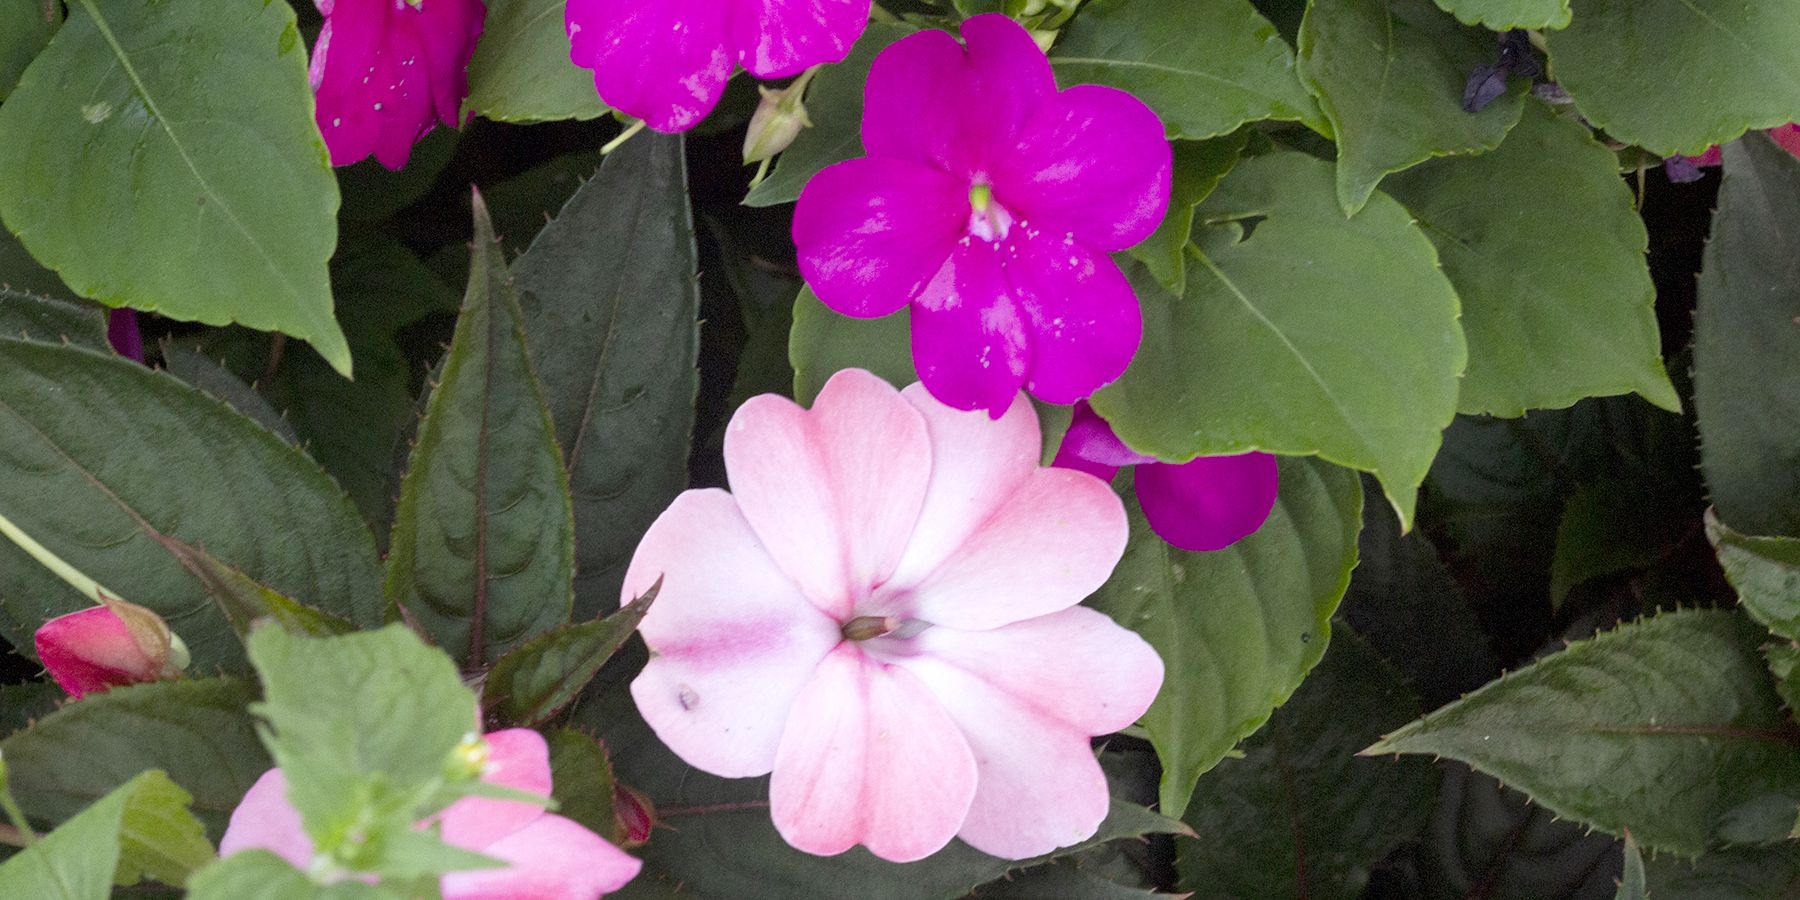 The Splitting of the Impatiens